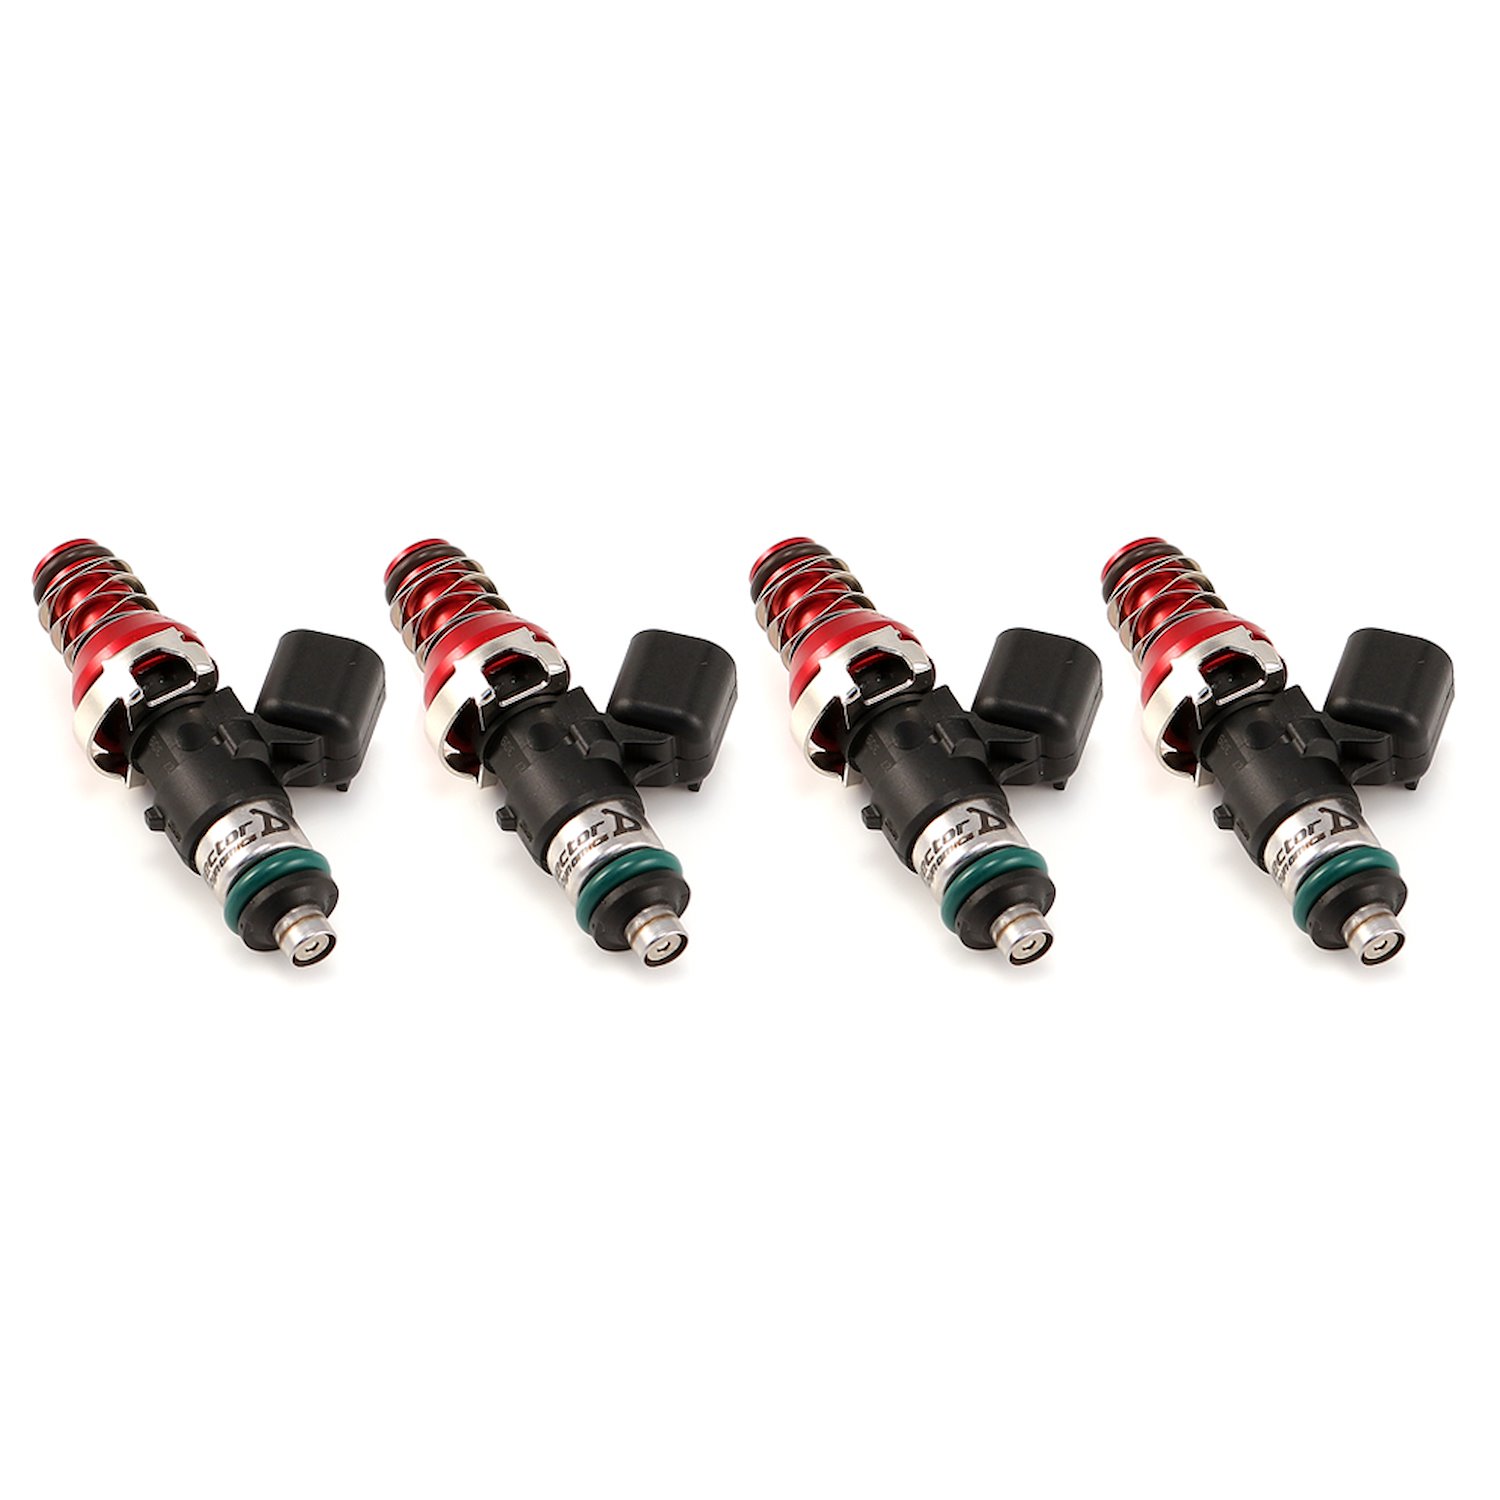 1700.48.11.14.4 1700cc Fuel Injector, 48 mm Length, 11 mm Top, 14 mm Lower O-Ring